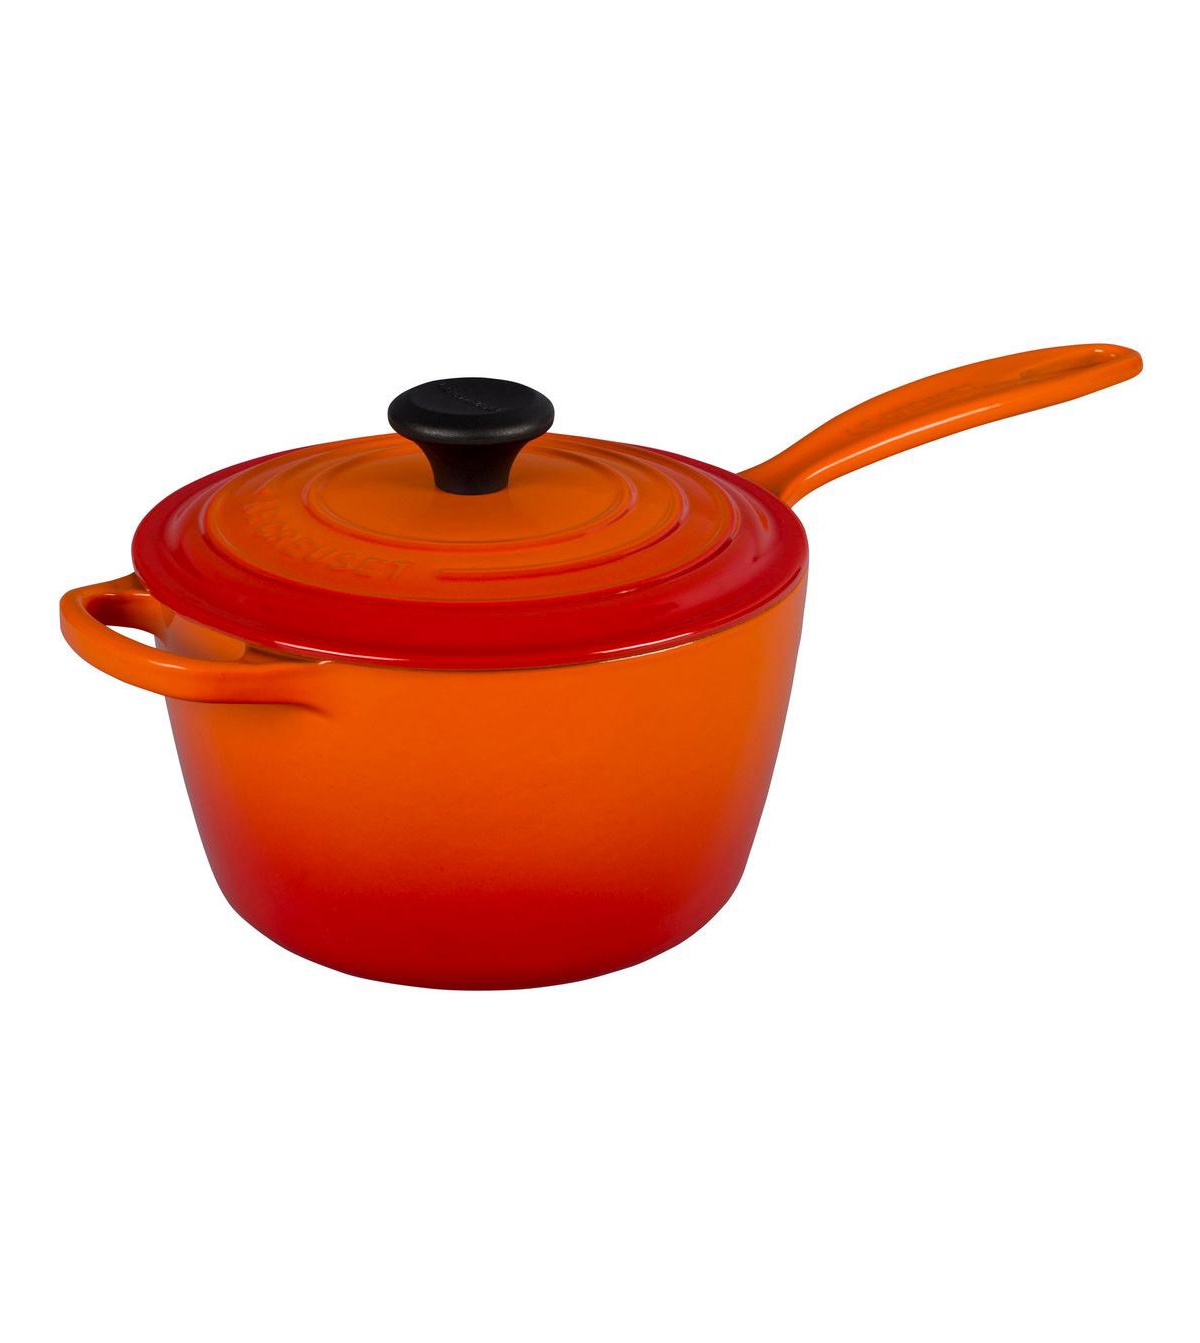 Le Creuset 2.25 Quart Enameled Cast Iron Saucepan With Lid In Flame